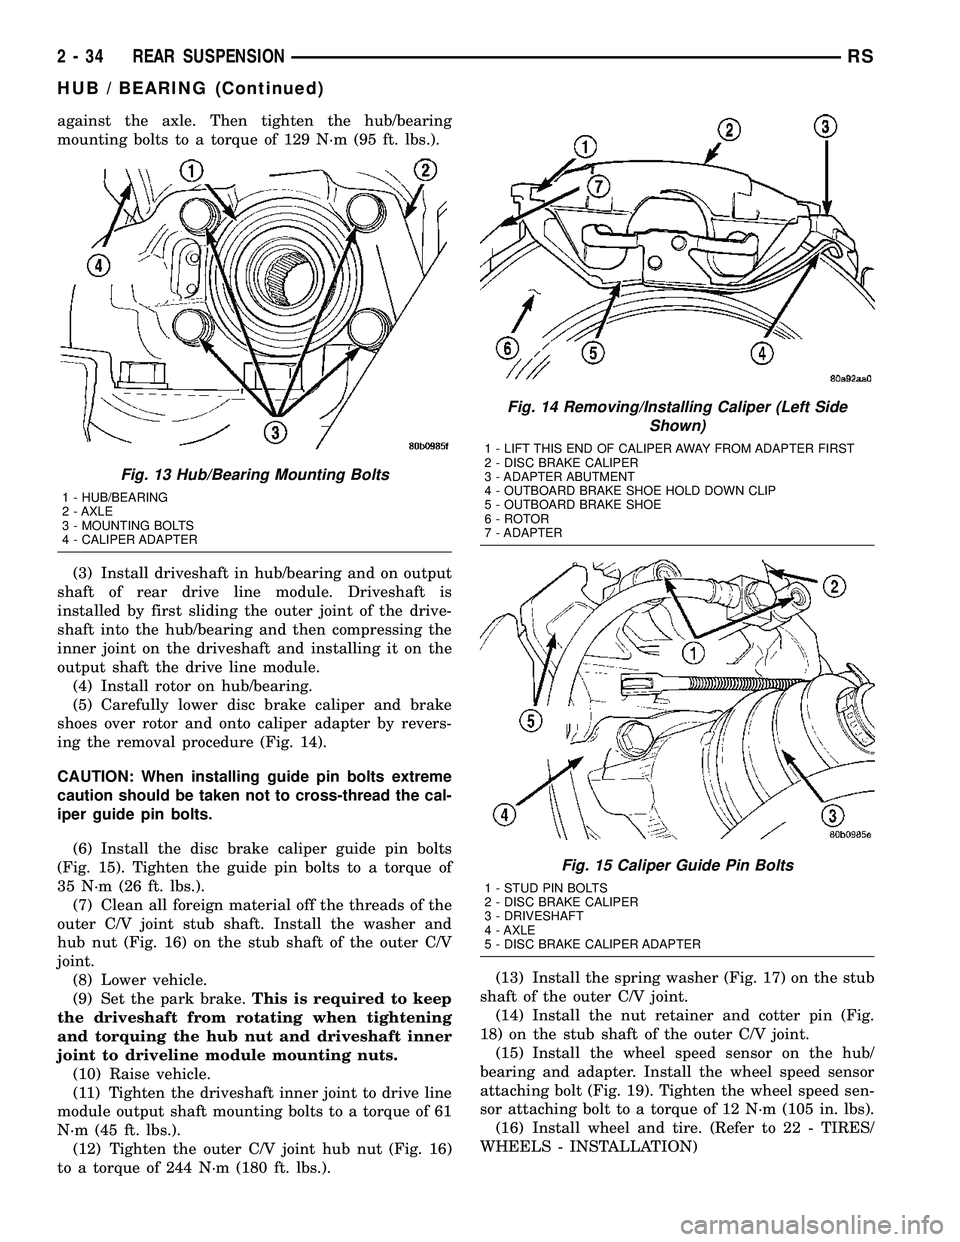 CHRYSLER CARAVAN 2005  Service Manual against the axle. Then tighten the hub/bearing
mounting bolts to a torque of 129 N´m (95 ft. lbs.).
(3) Install driveshaft in hub/bearing and on output
shaft of rear drive line module. Driveshaft is
